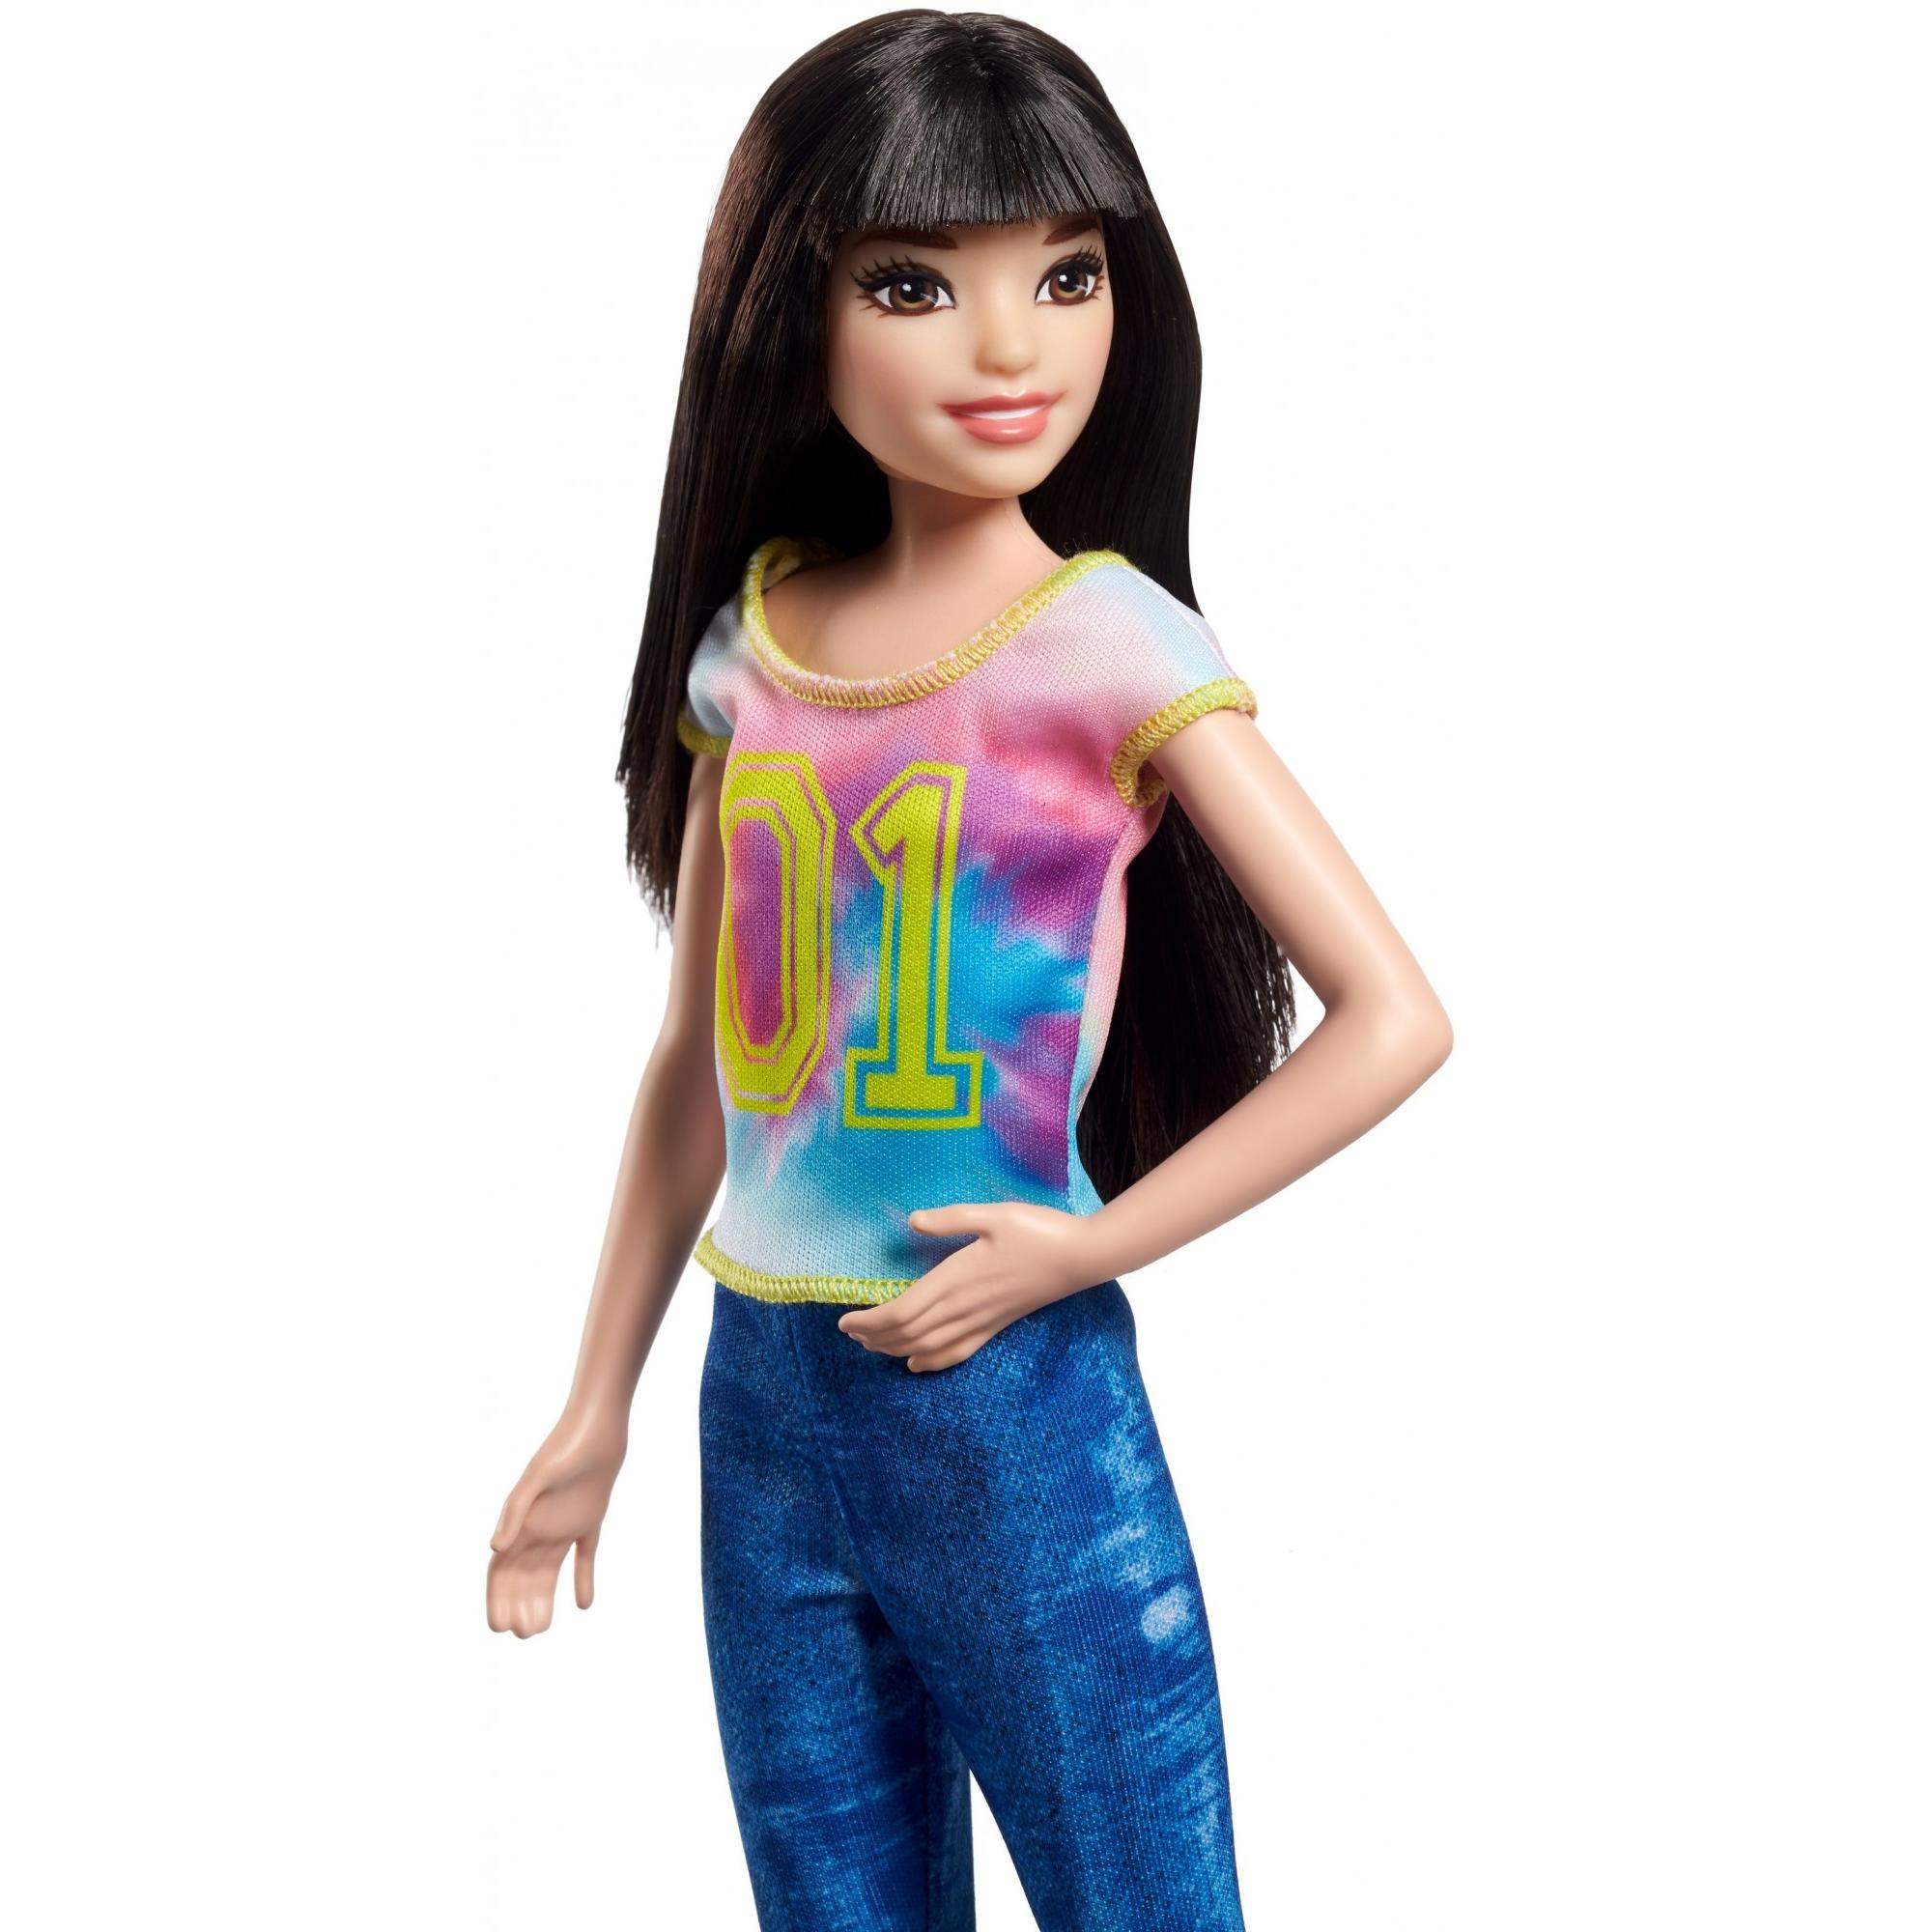 Barbie Skipper Babysitters Inc. Doll And Accessory - image 3 of 9